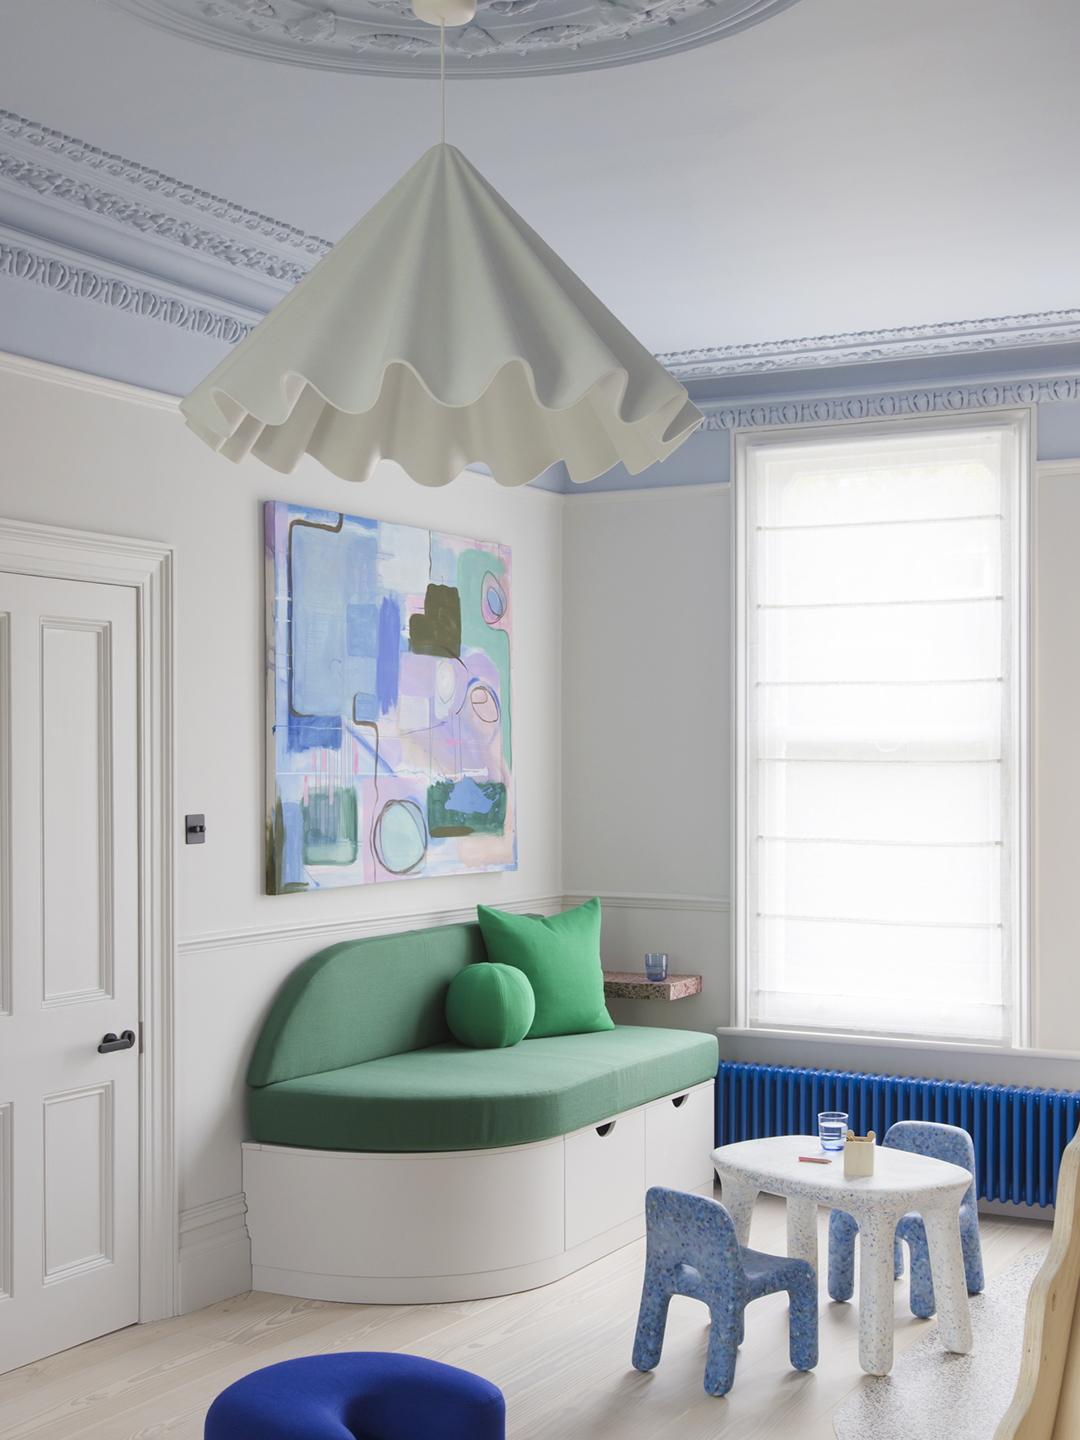 Kids' room with frilly white pendant lamp and green banquette sofa.